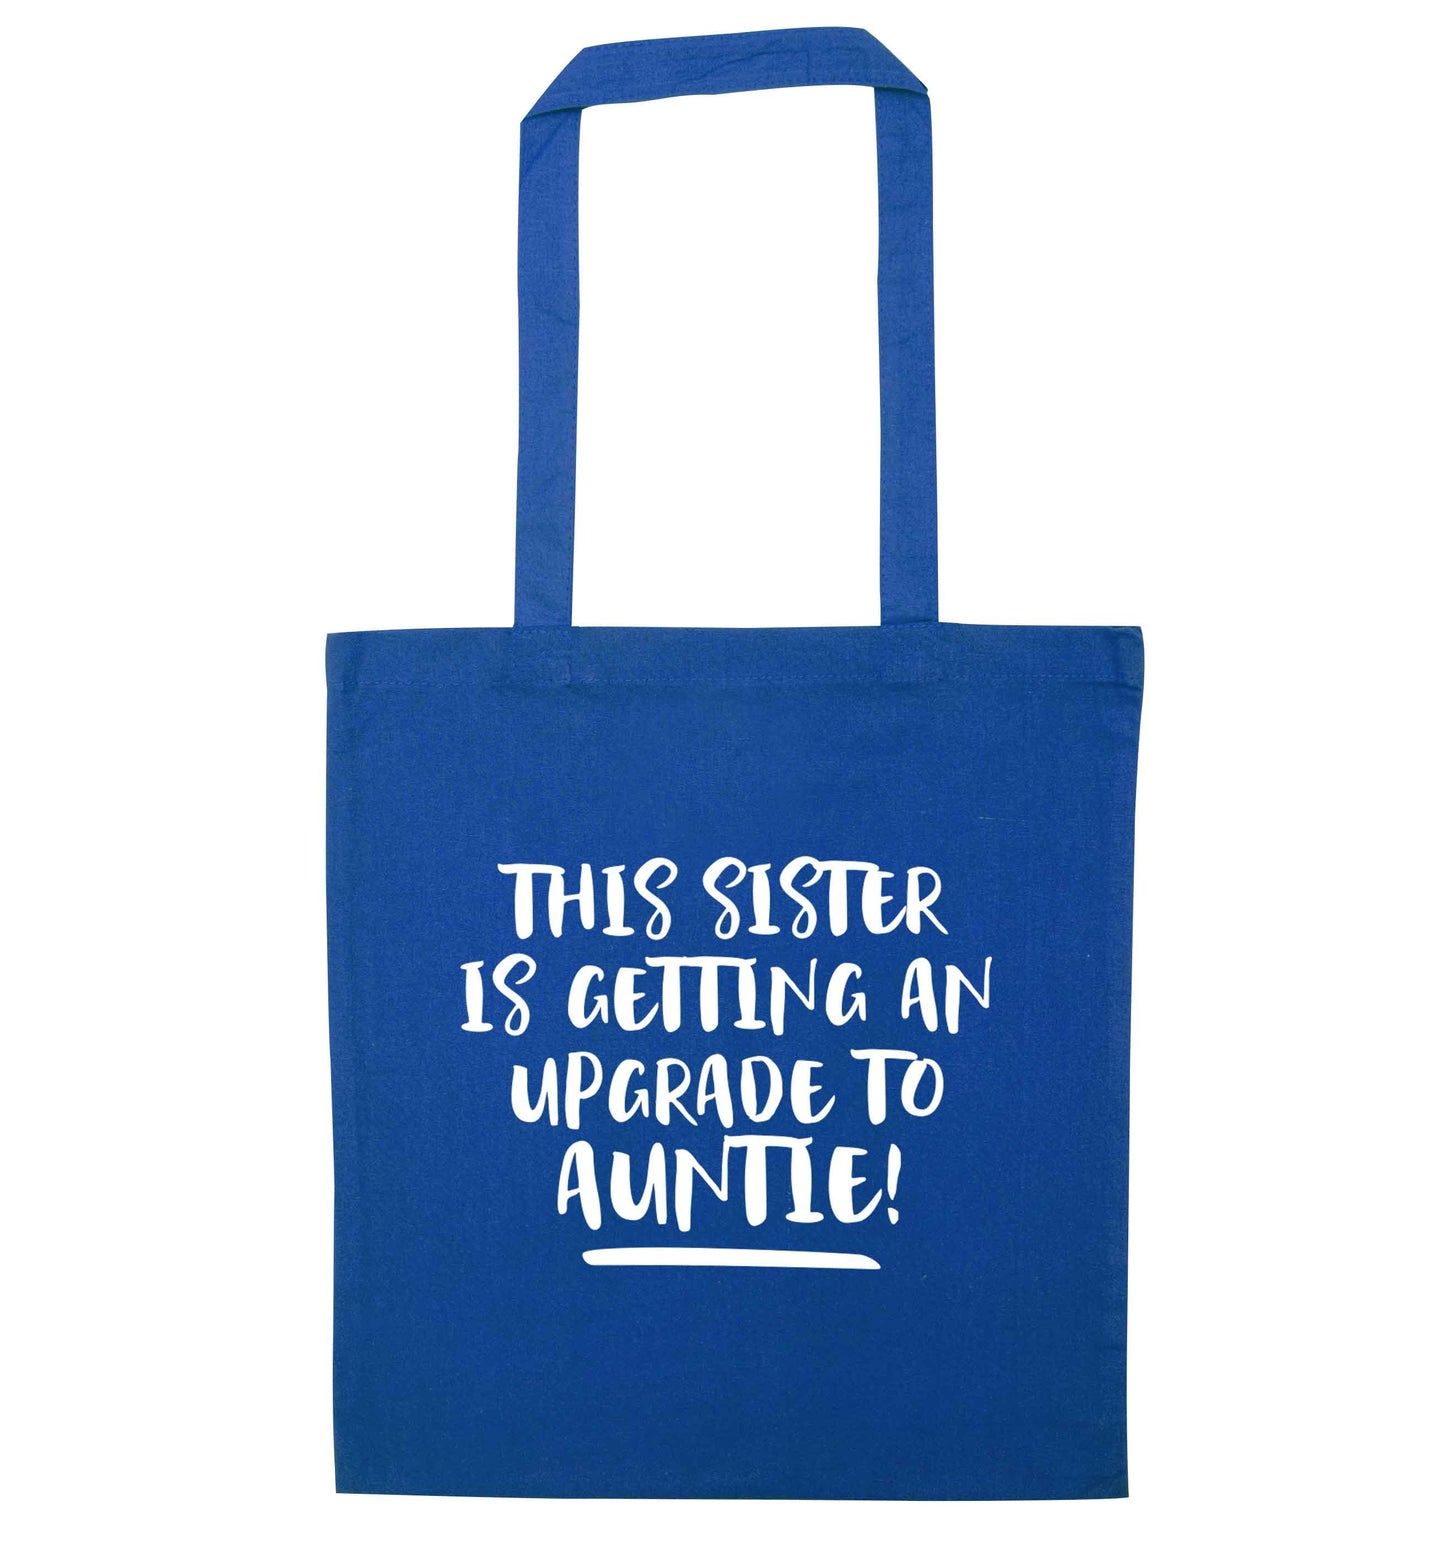 This sister is getting an upgrade to auntie! blue tote bag